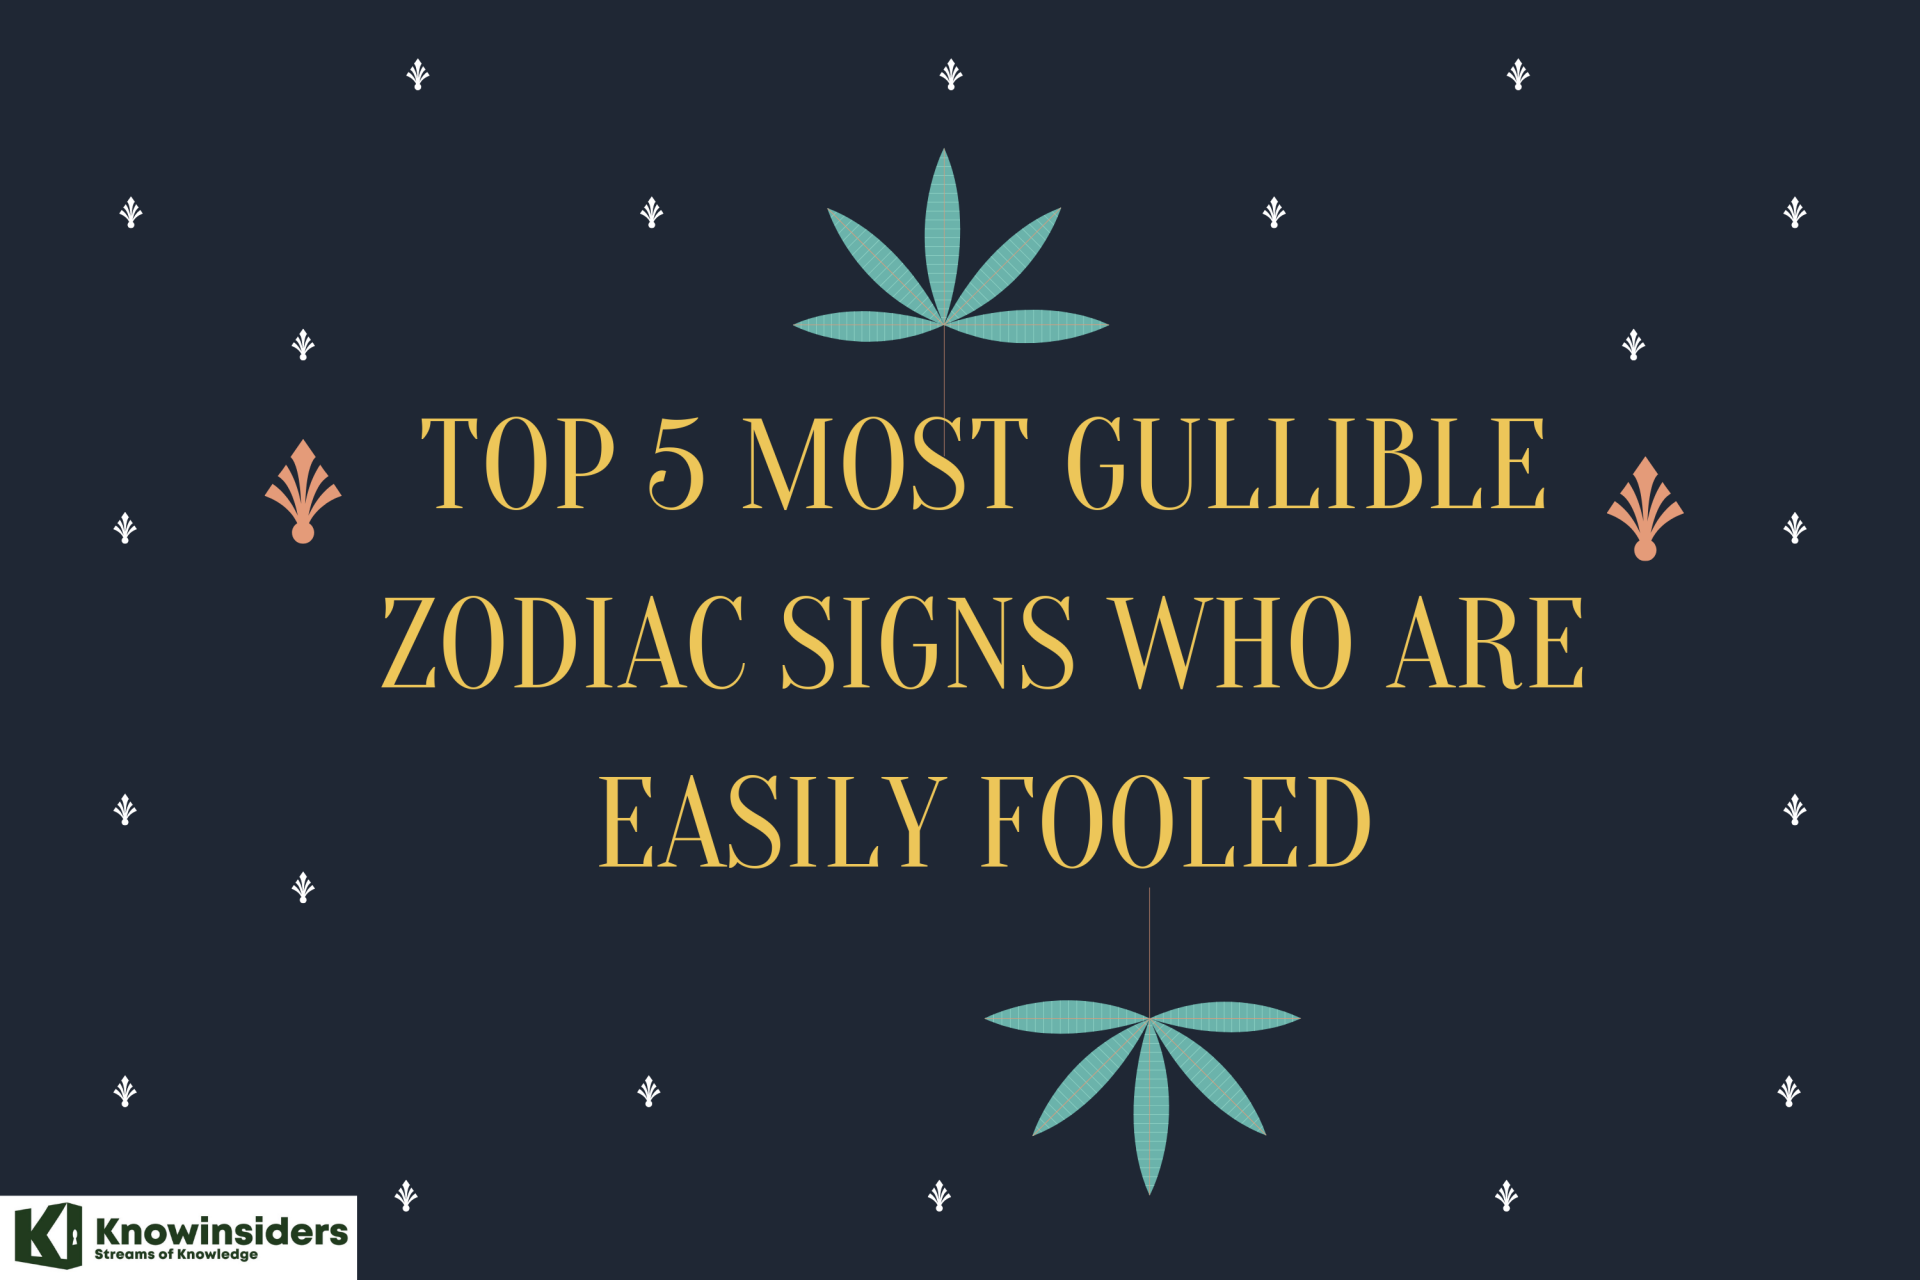 Top 5 Most Gullible Zodiac Signs Who Are Easily Fooled